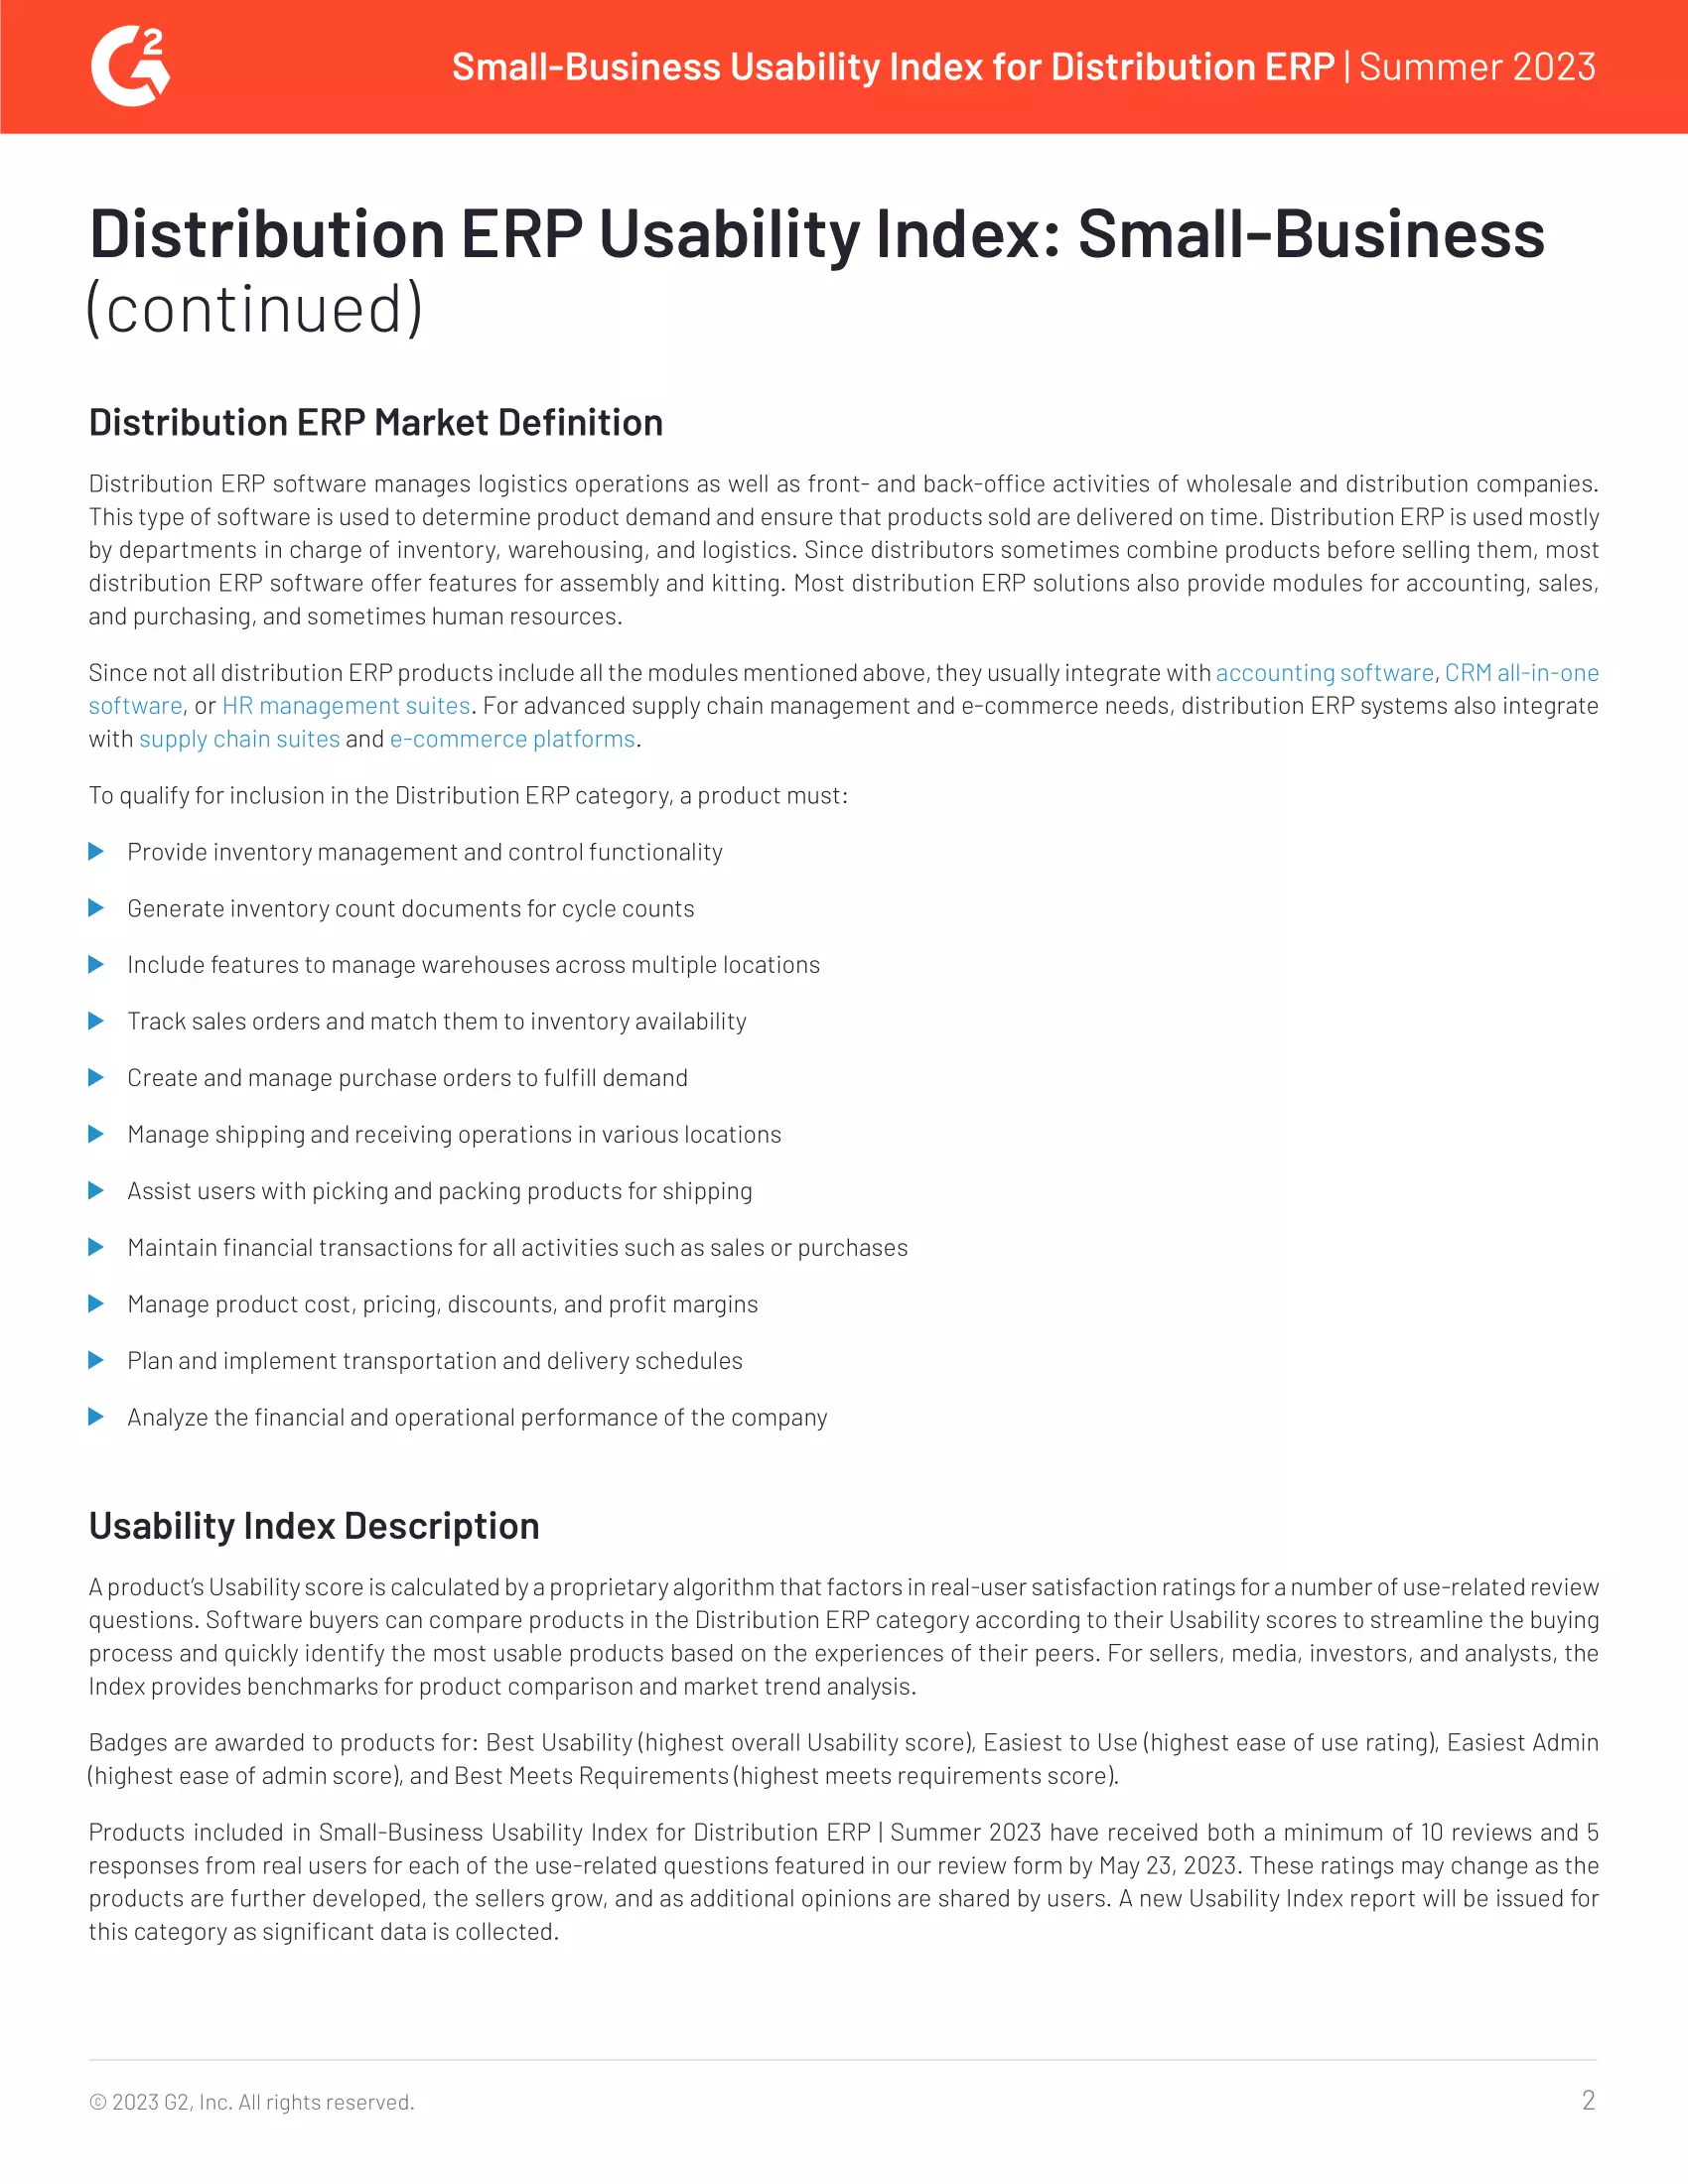 User Friendly: G2 Reviews Acumatica in Its Small-Business Distribution ERP Usability Index, page 1